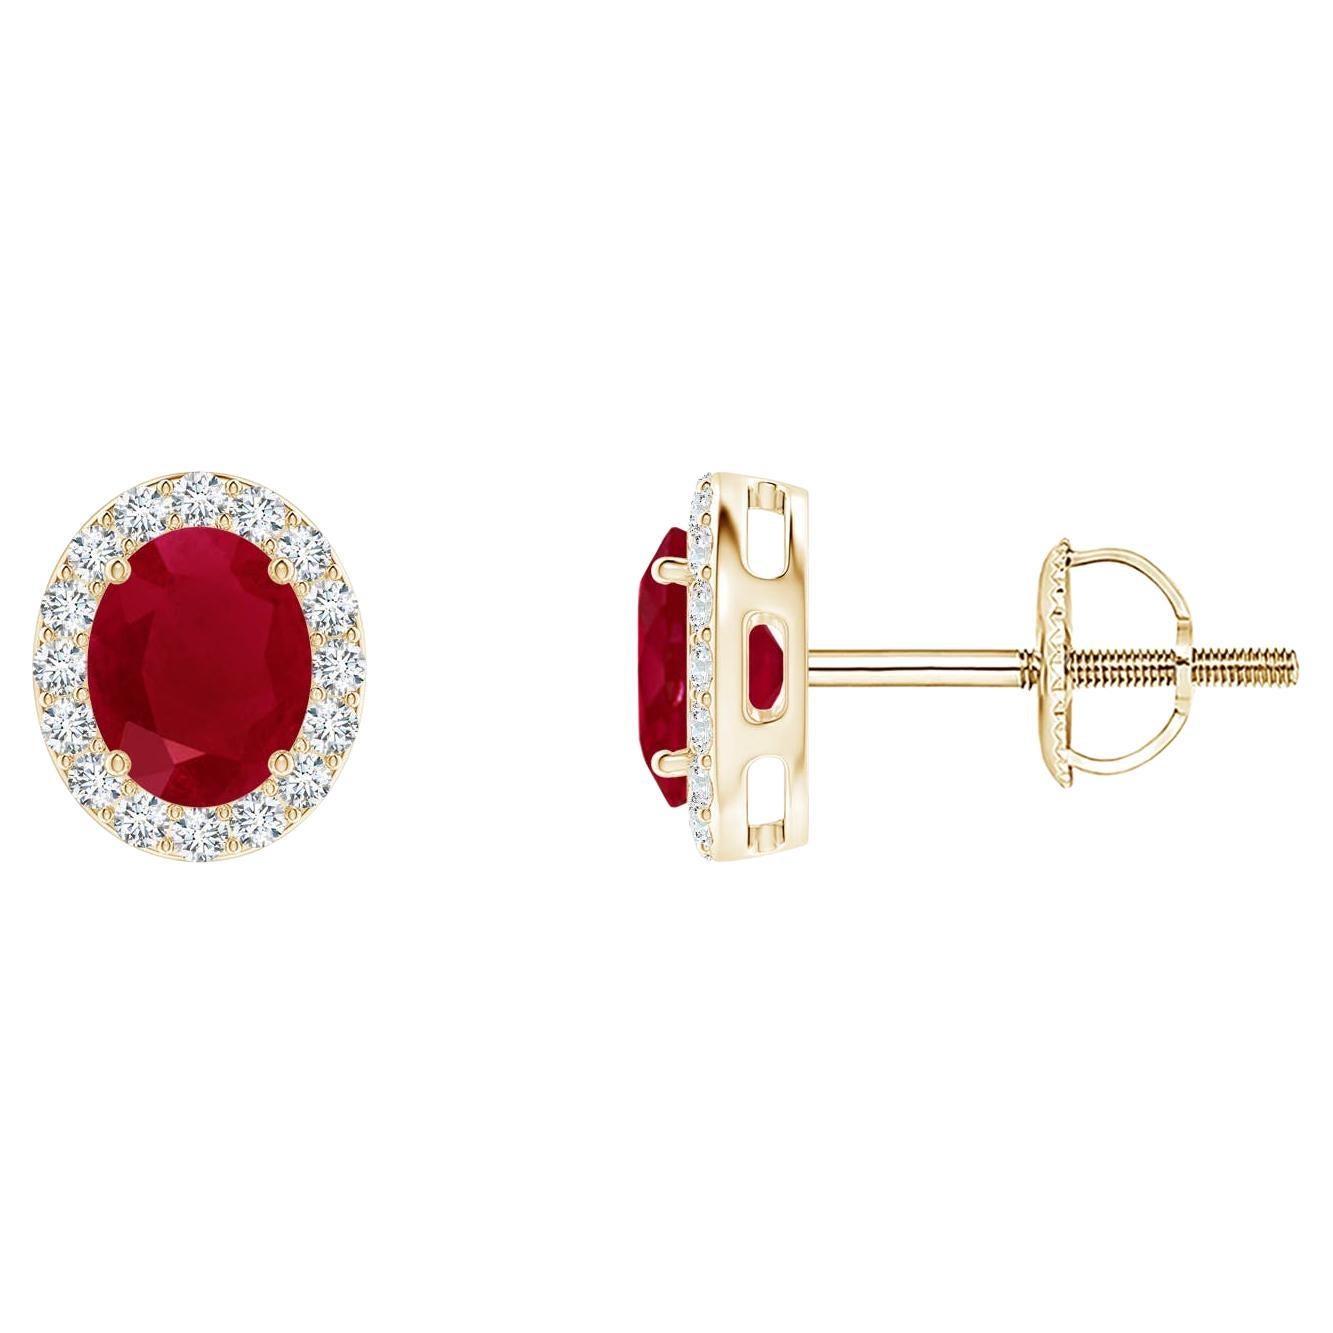 ANGARA Natural Oval 0.80ct Ruby Studs with Diamond Halo in 14K Yellow Gold